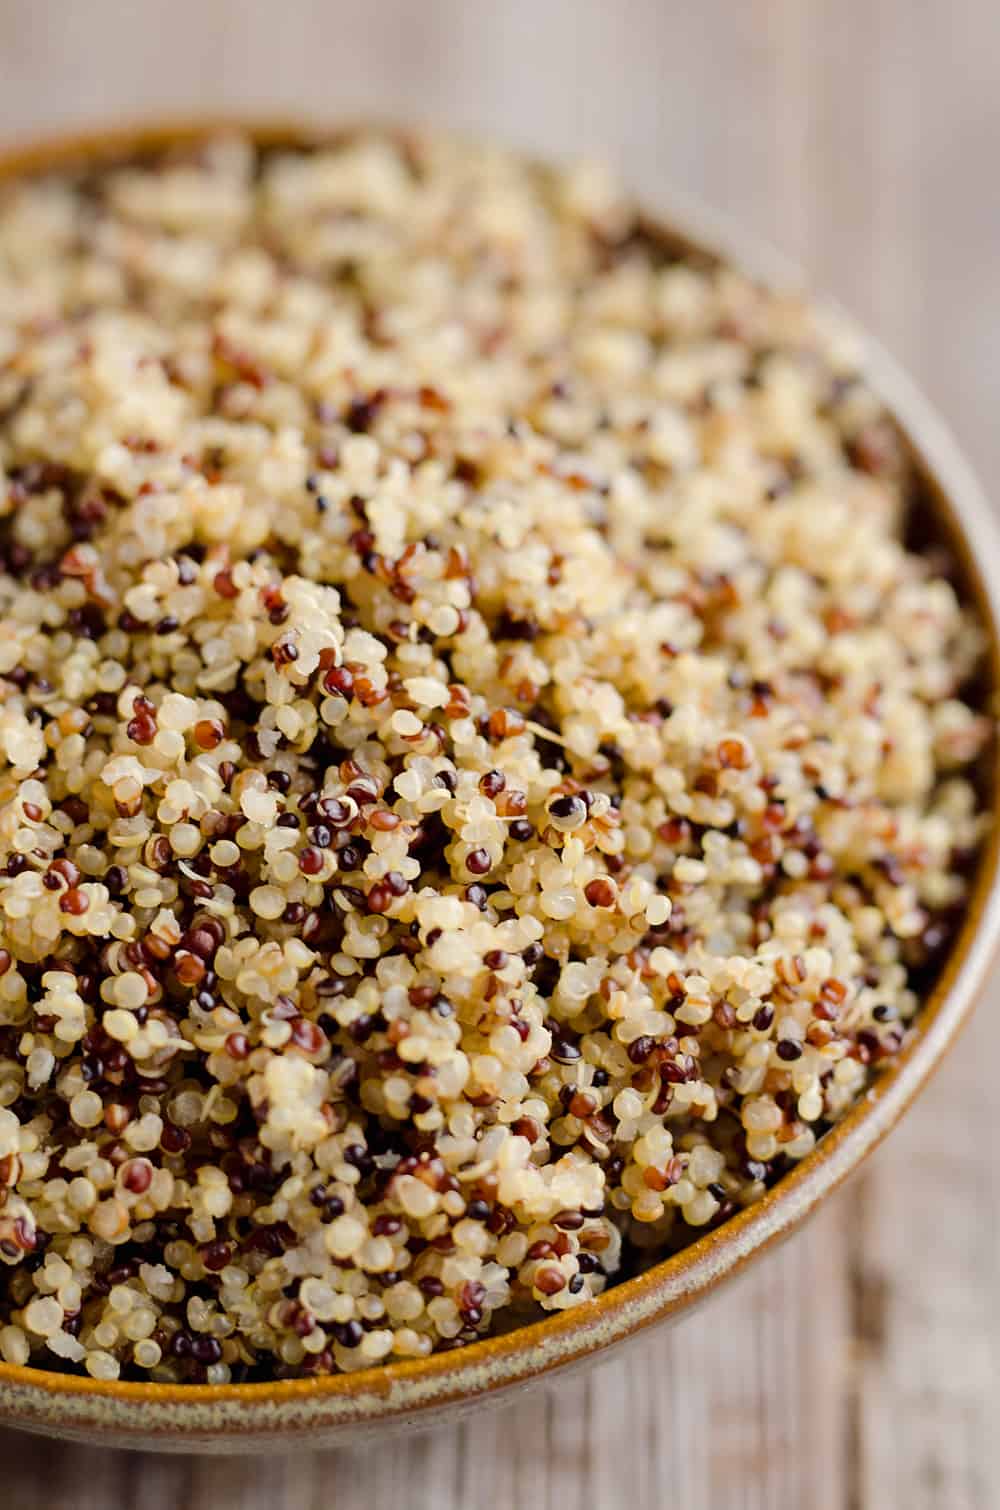 This is the Easiest Fluffy Quinoa Recipe you will make with the help of your Pressure Cooker. Set it and forget it for the best quinoa made in your Instant Pot in just 20 minutes. 